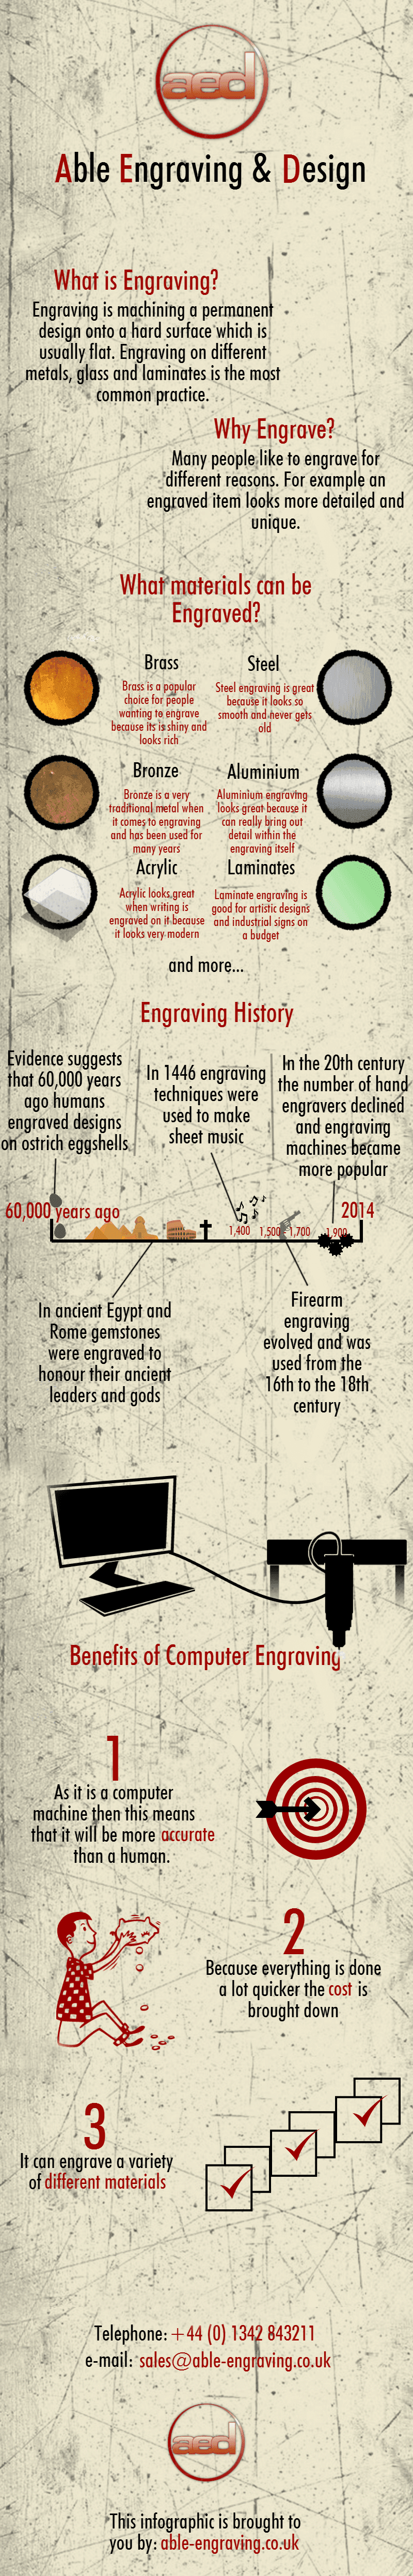 Able Engraving infographic